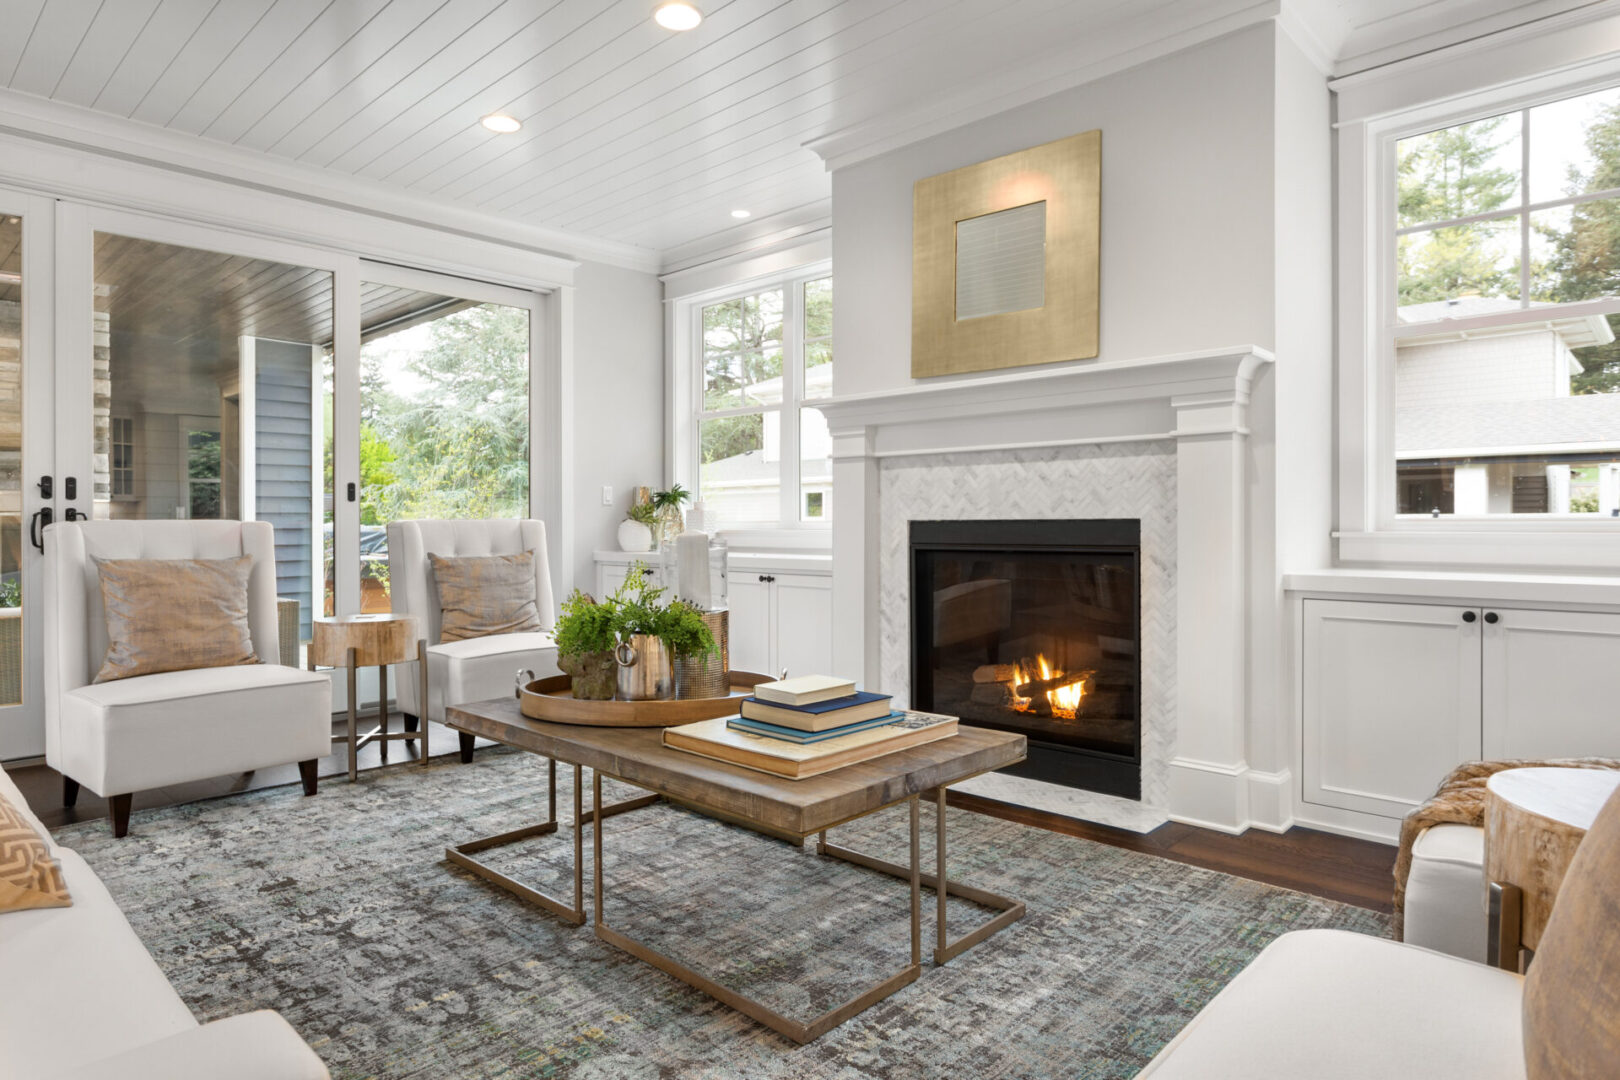 A living room with a fireplace and white walls.